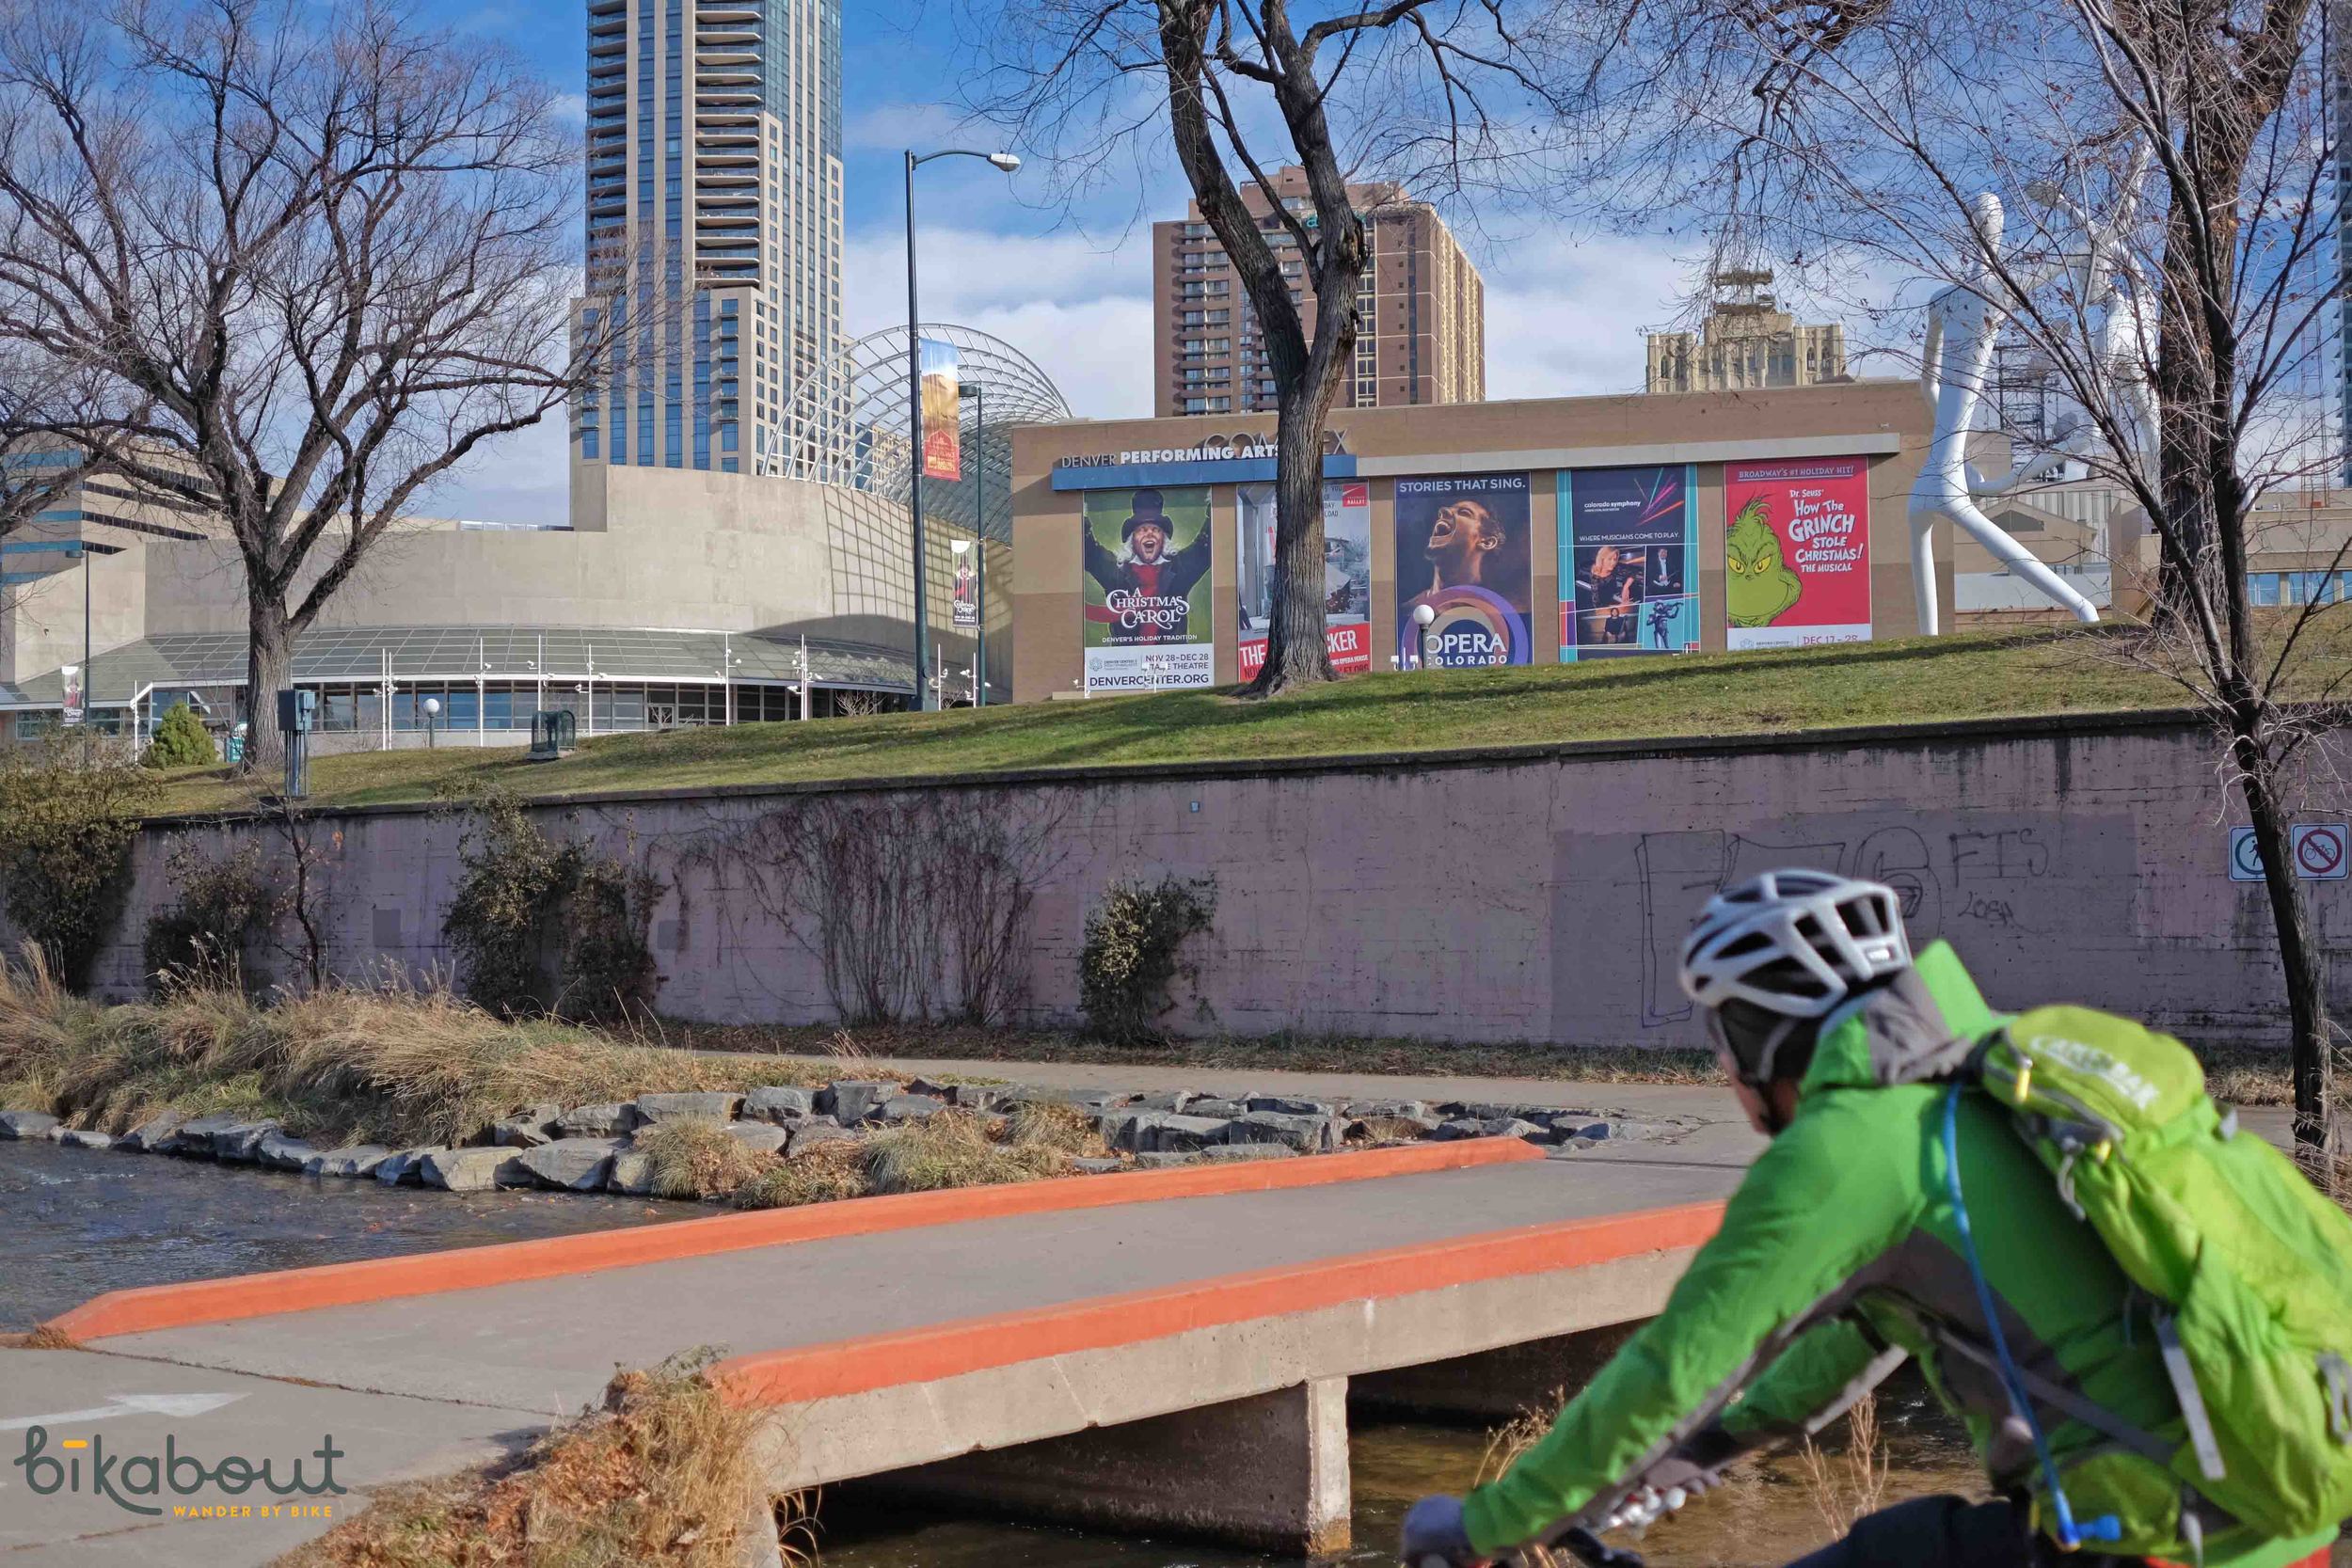 Denver has a slew of river paths that provide a calm ride next to water